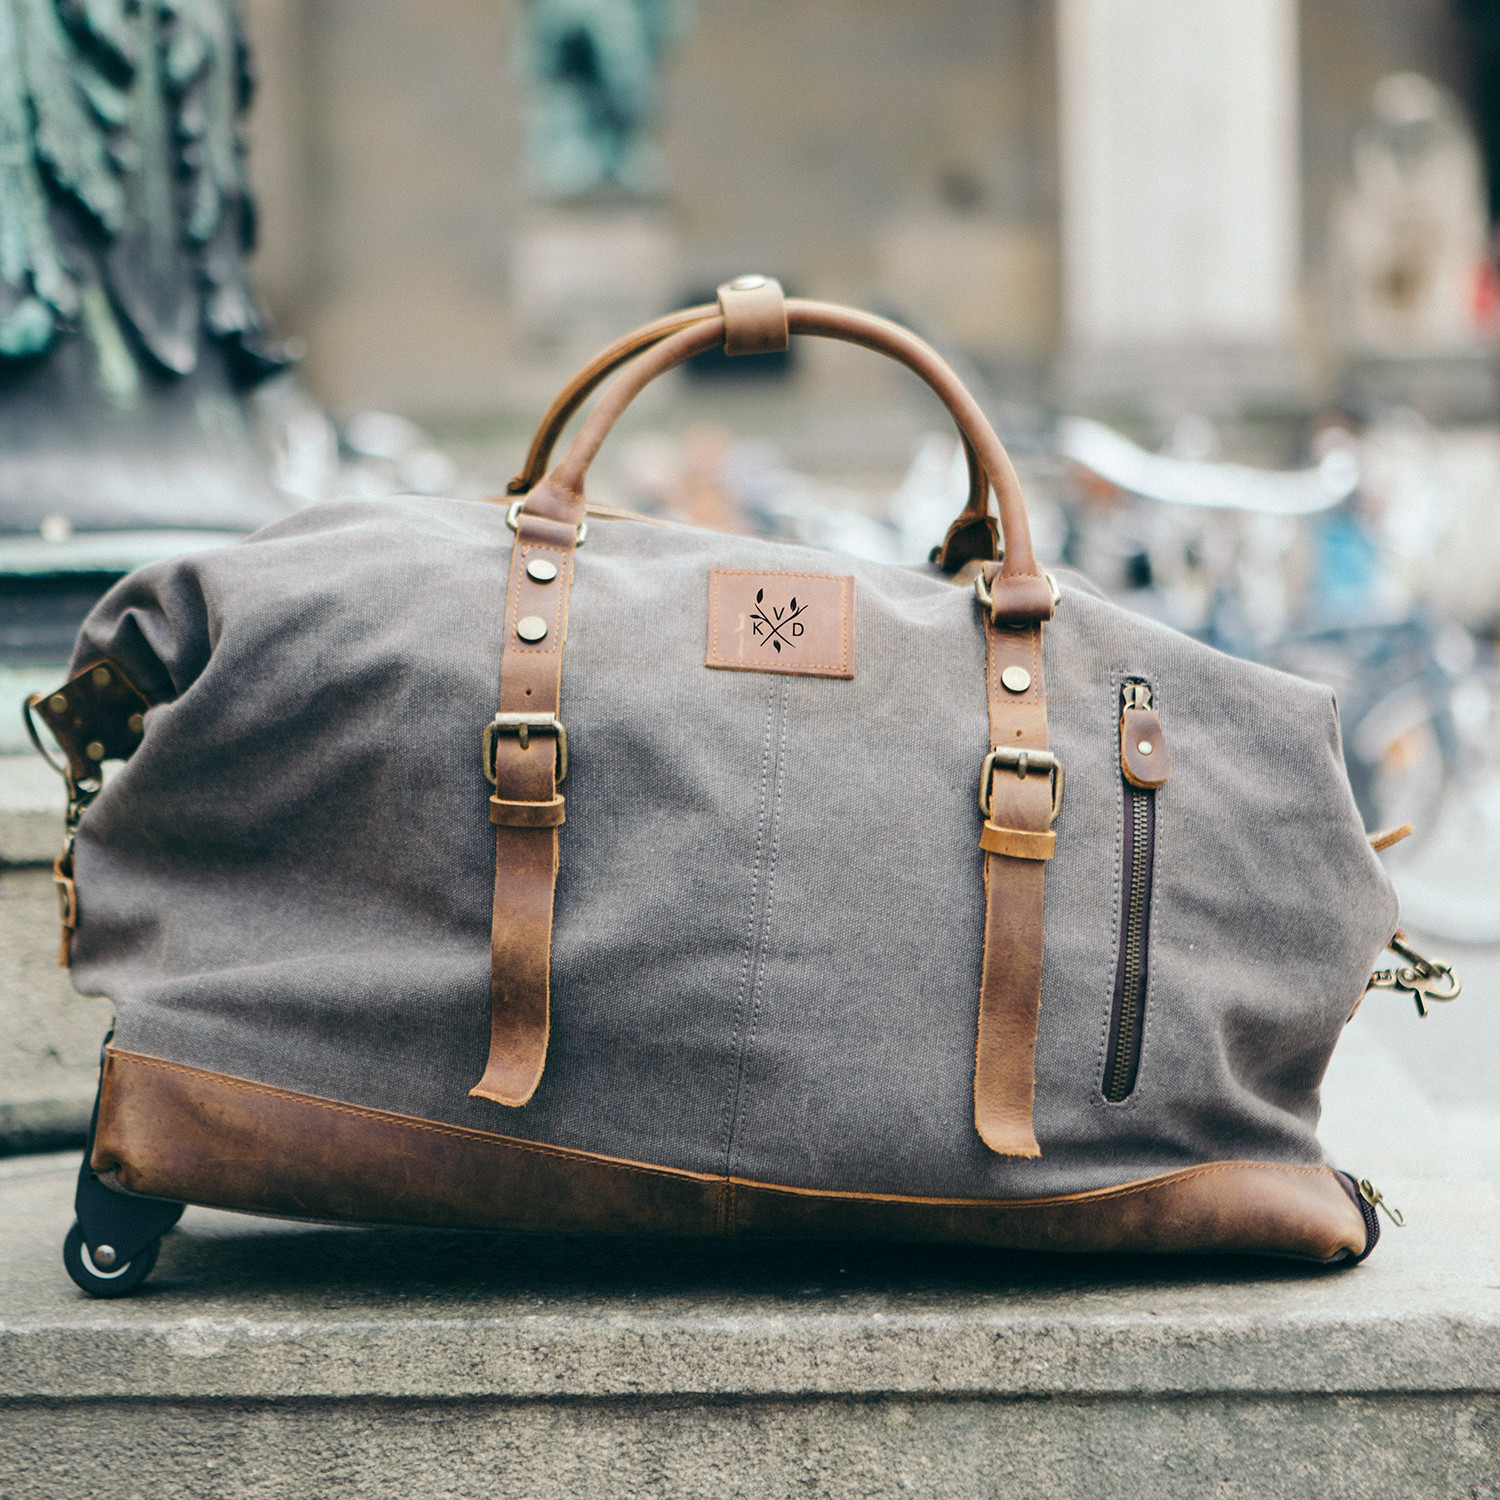 Humber Travel Holdall Bag // Grey - KOVERED - Touch of Modern